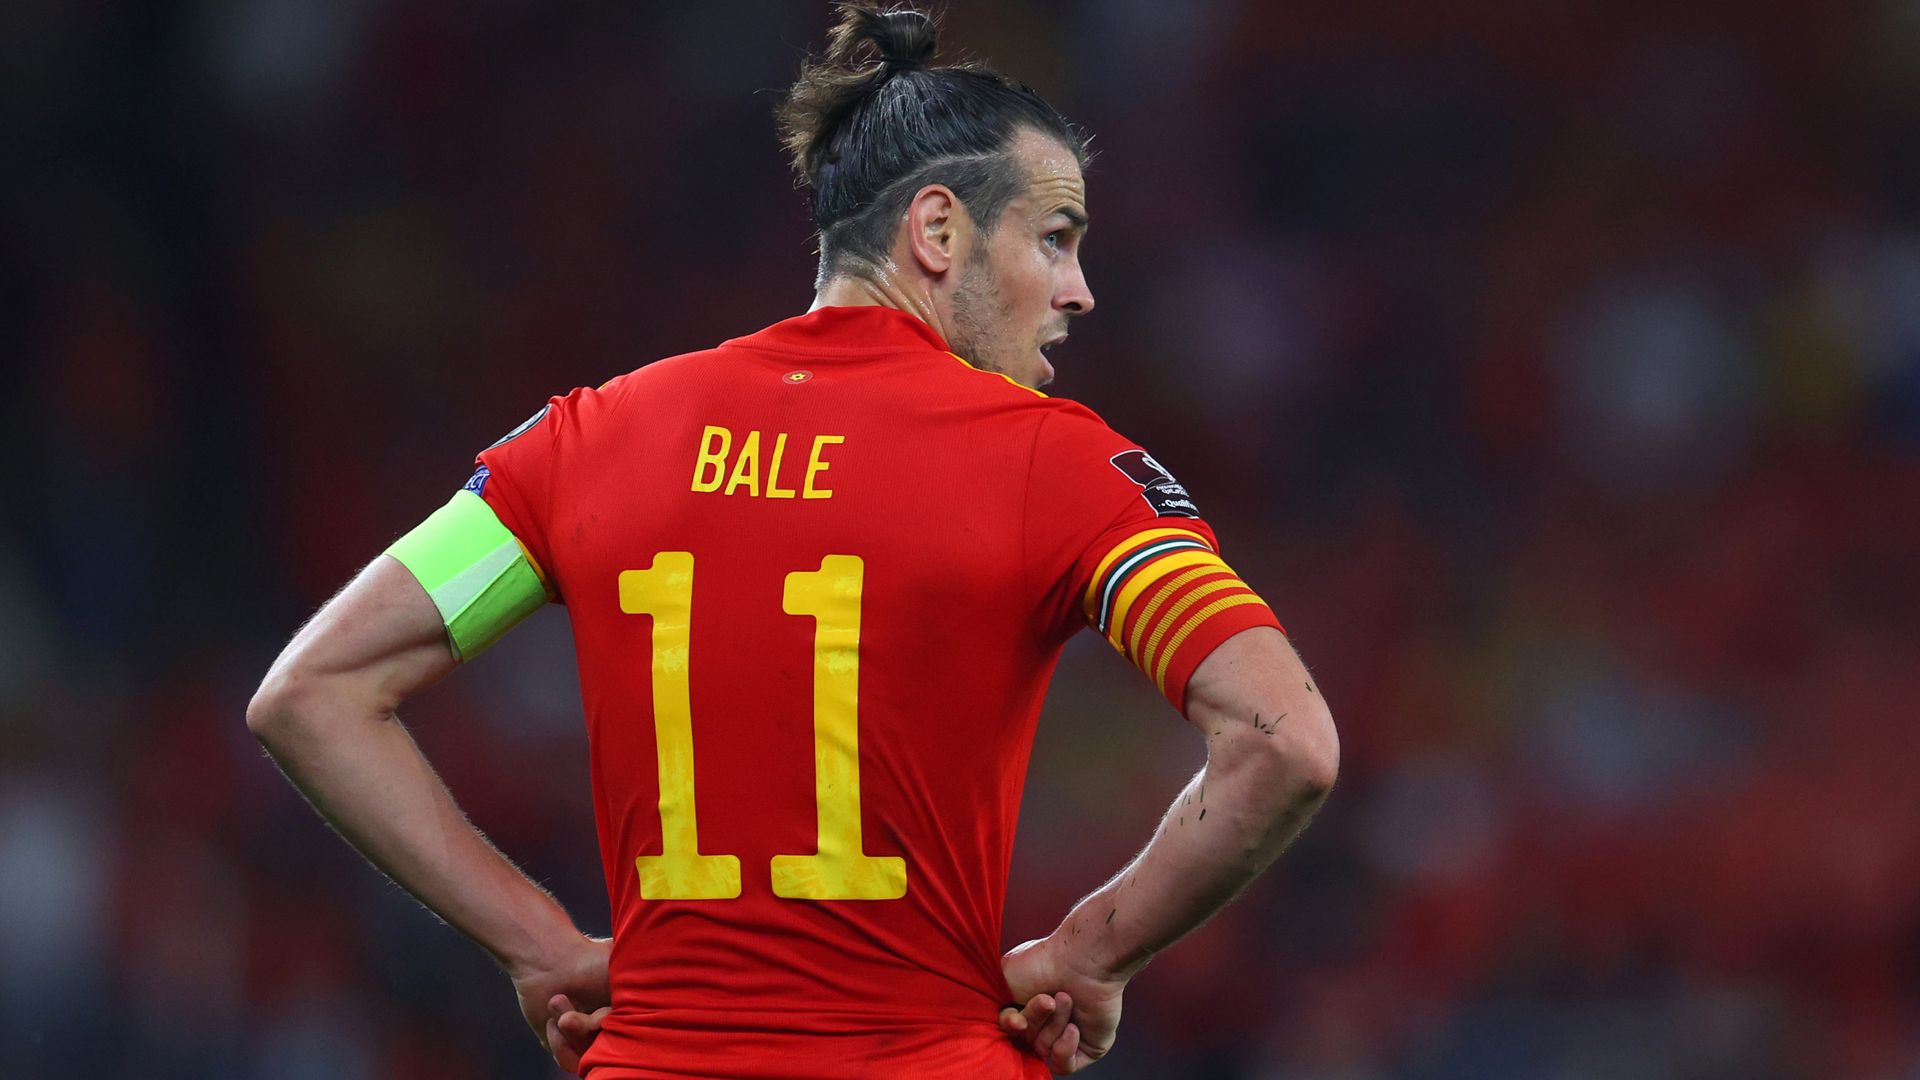 Bale 'raring to go' ahead of 100th cap